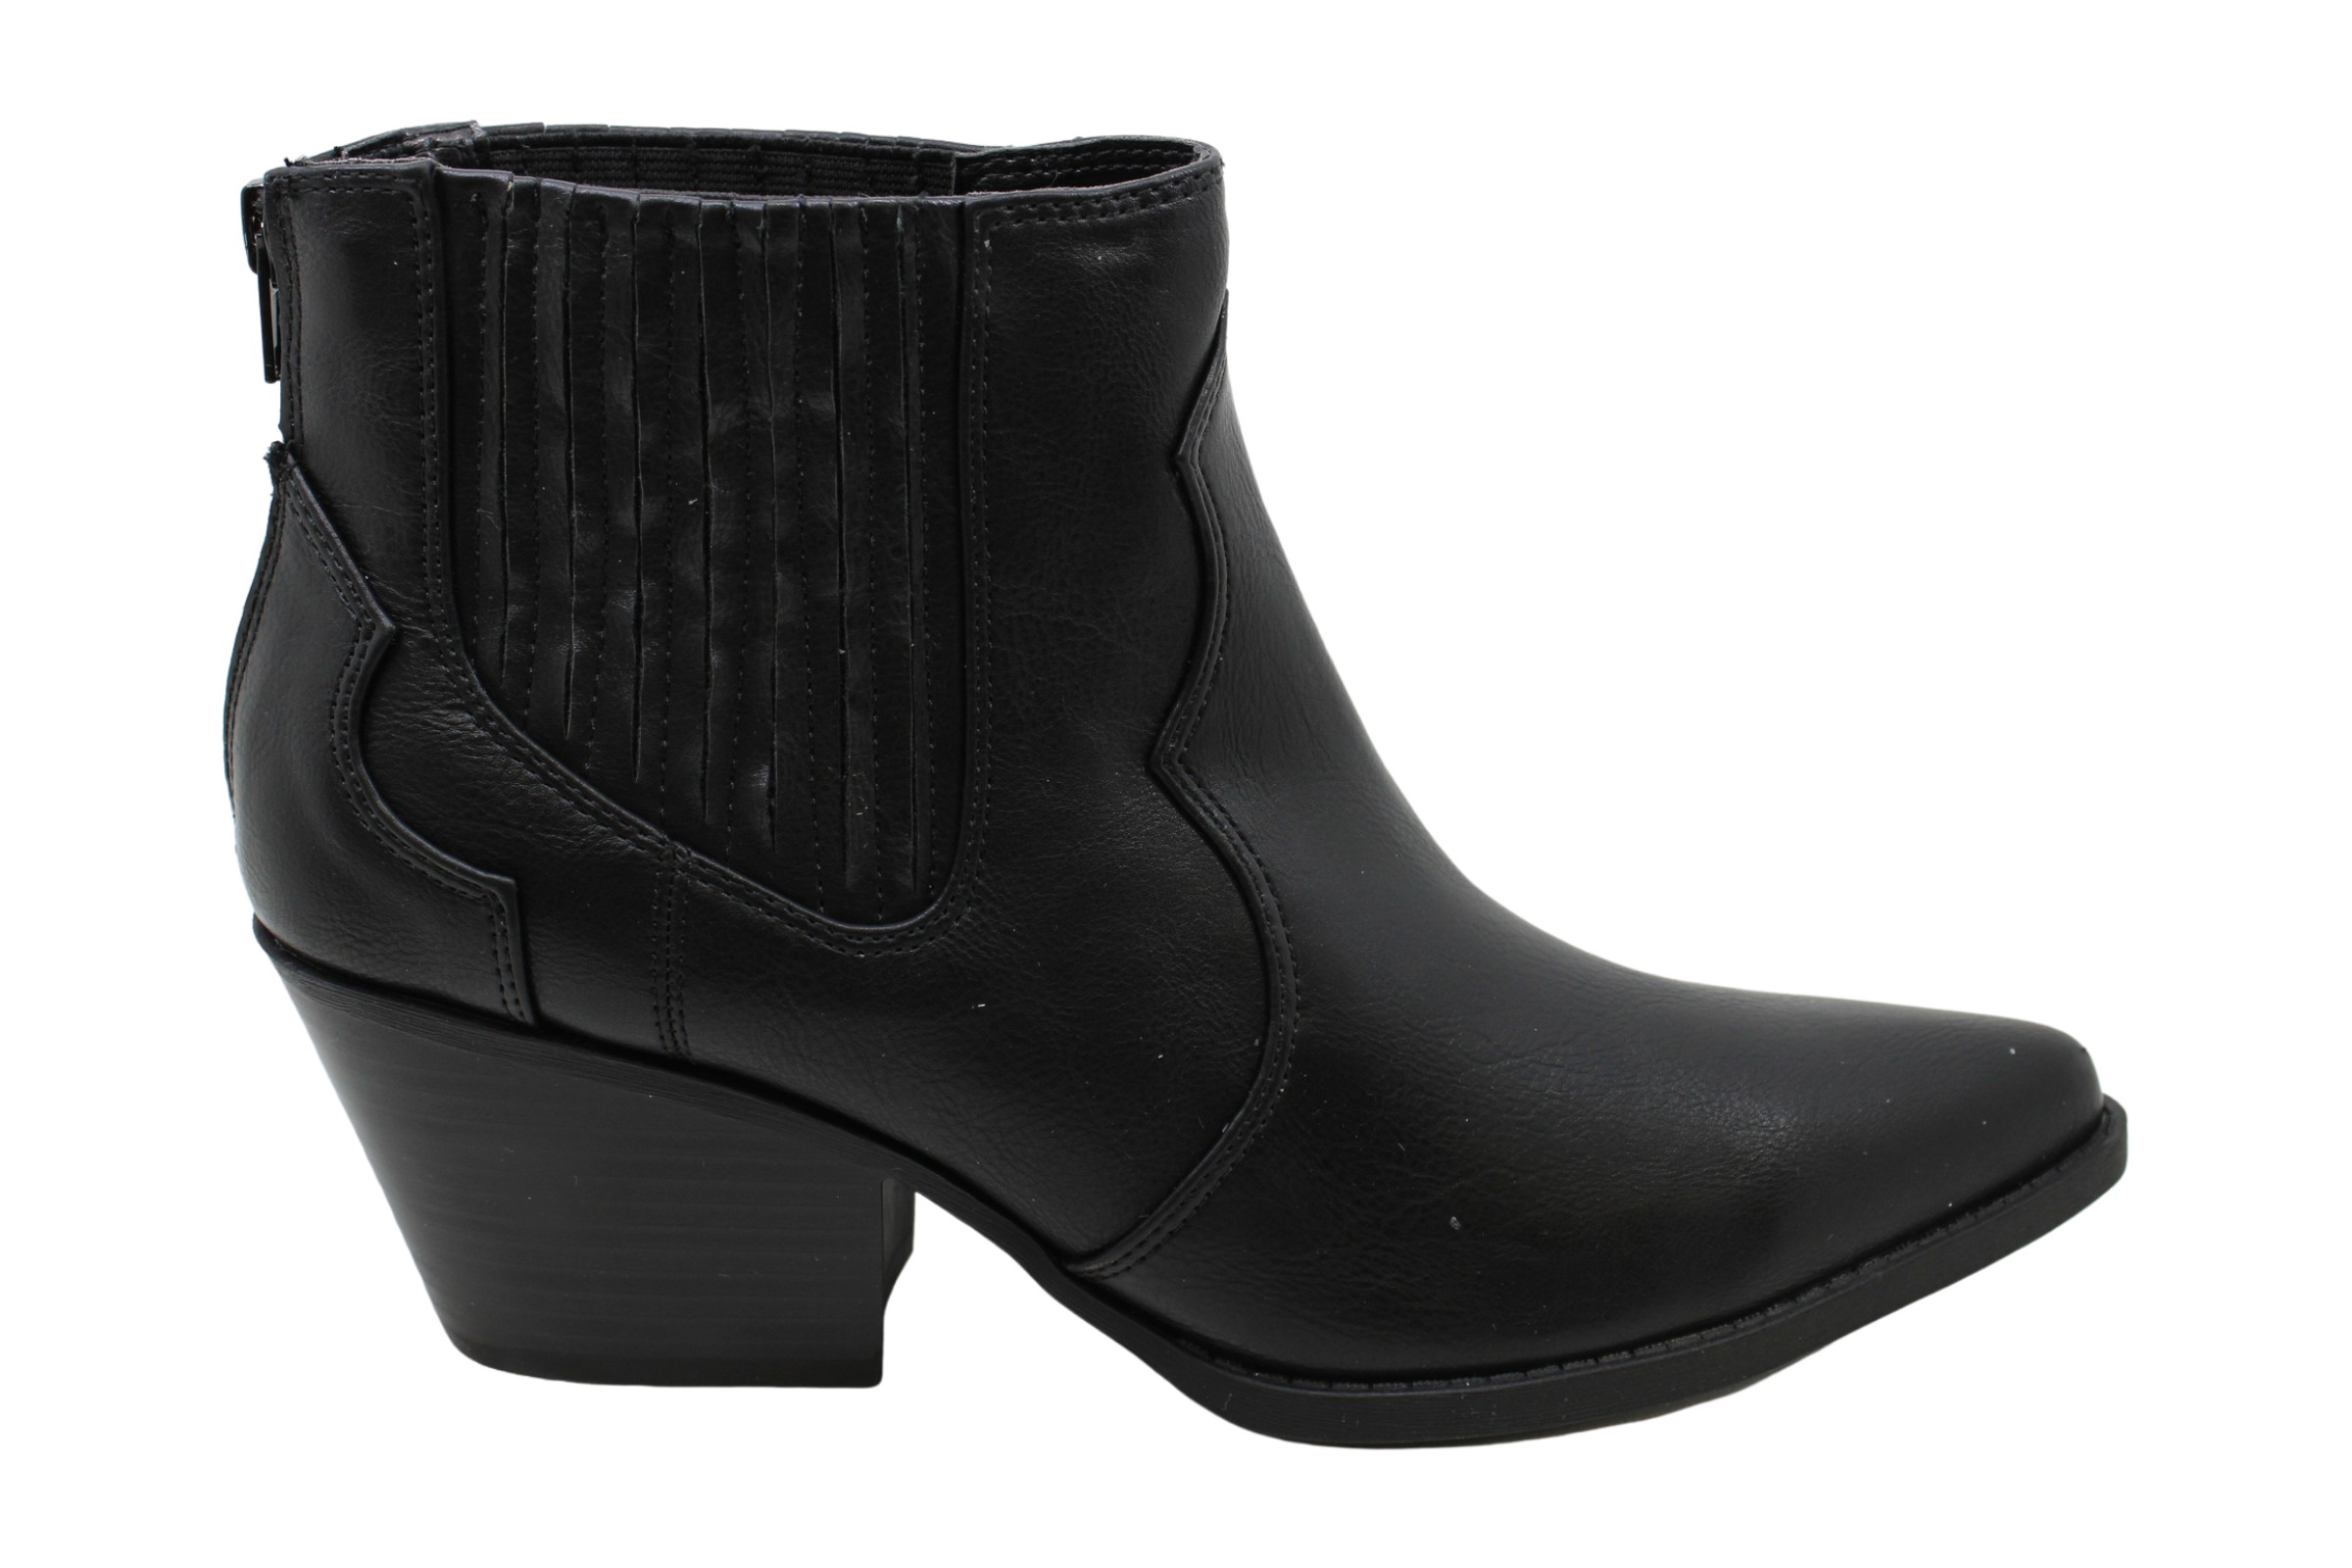 ESPRIT Womens Alessia Pointed Toe Ankle Chelsea Boots, Black 1, Size 9. ...